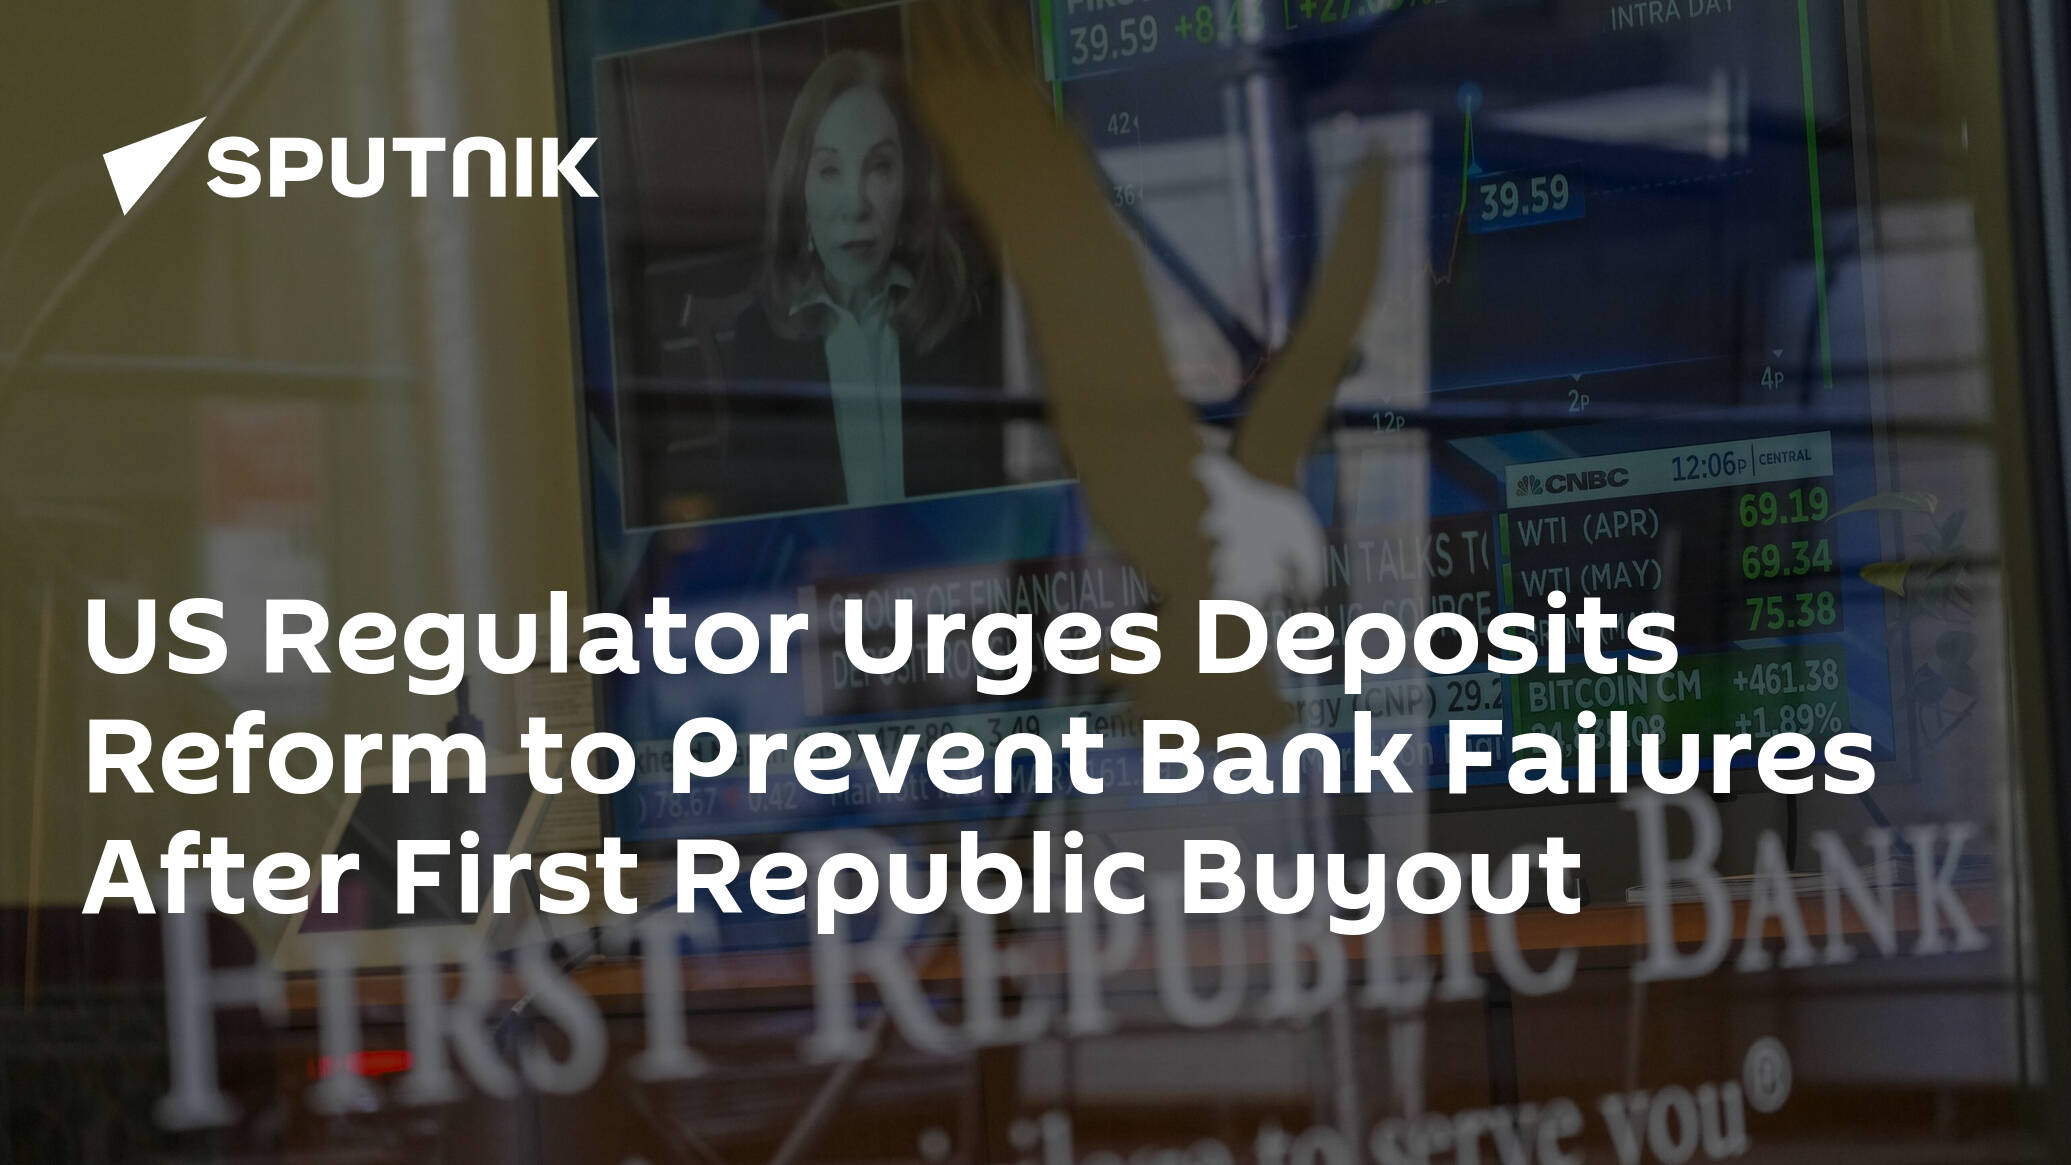 US Regulator Urges Deposits Reform to Prevent Bank Failures After First Republic Buyout